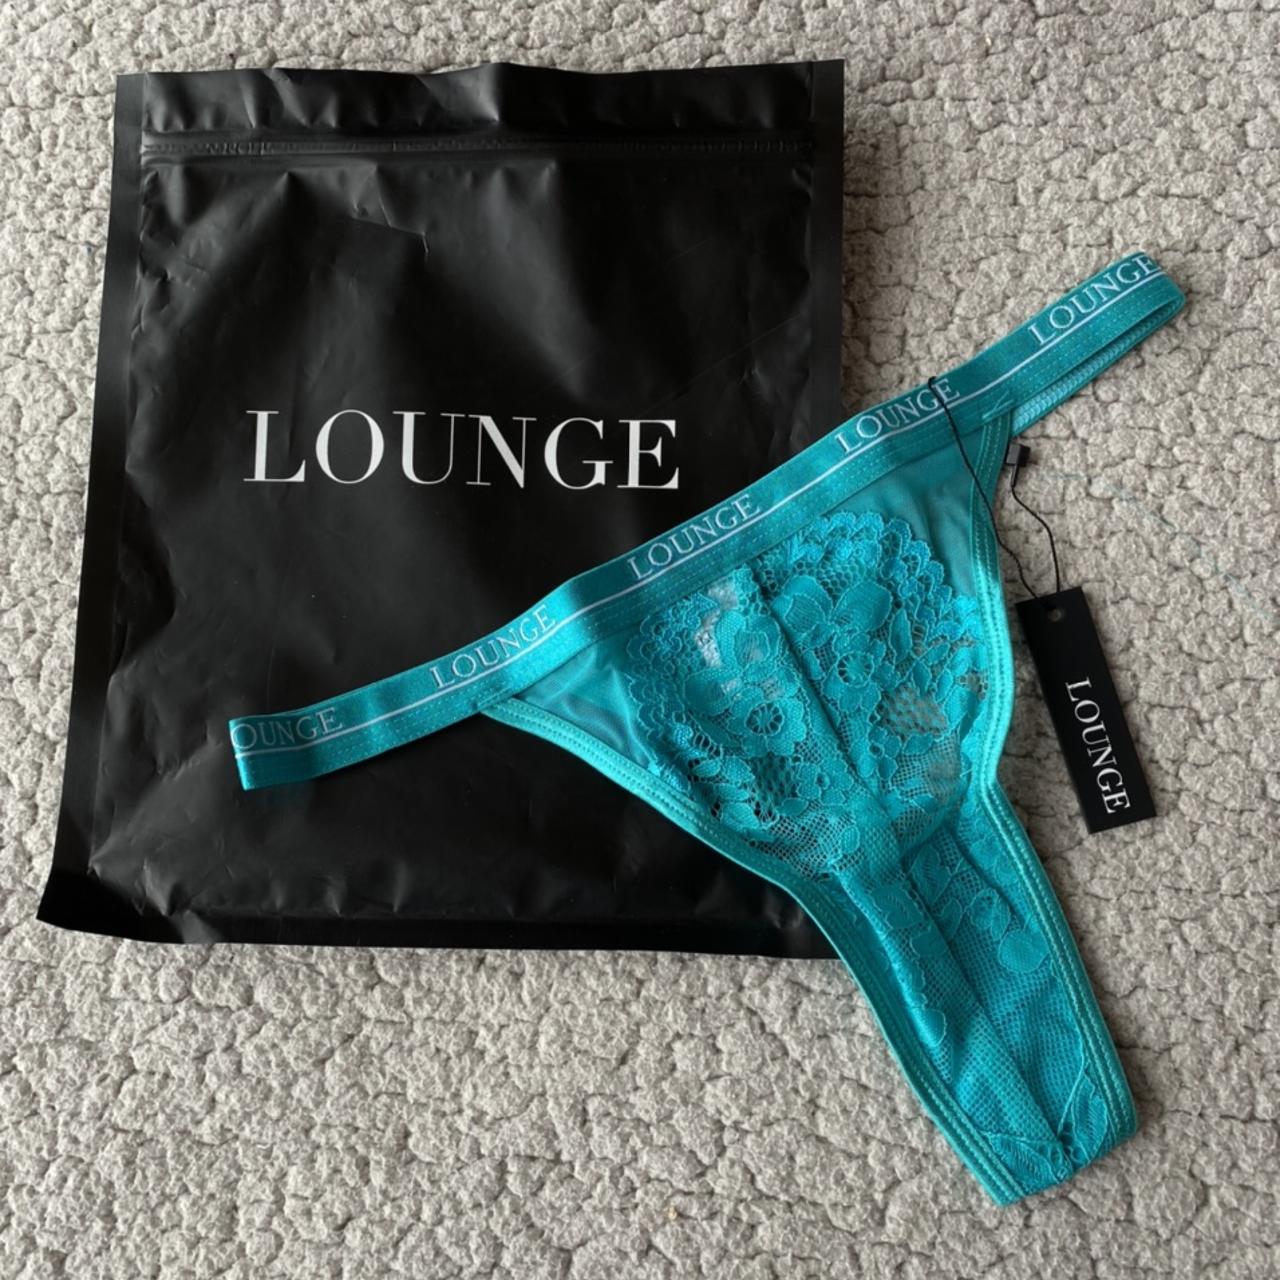 Lounge Underwear Teal Blossom Balcony Thong. Lounge - Depop